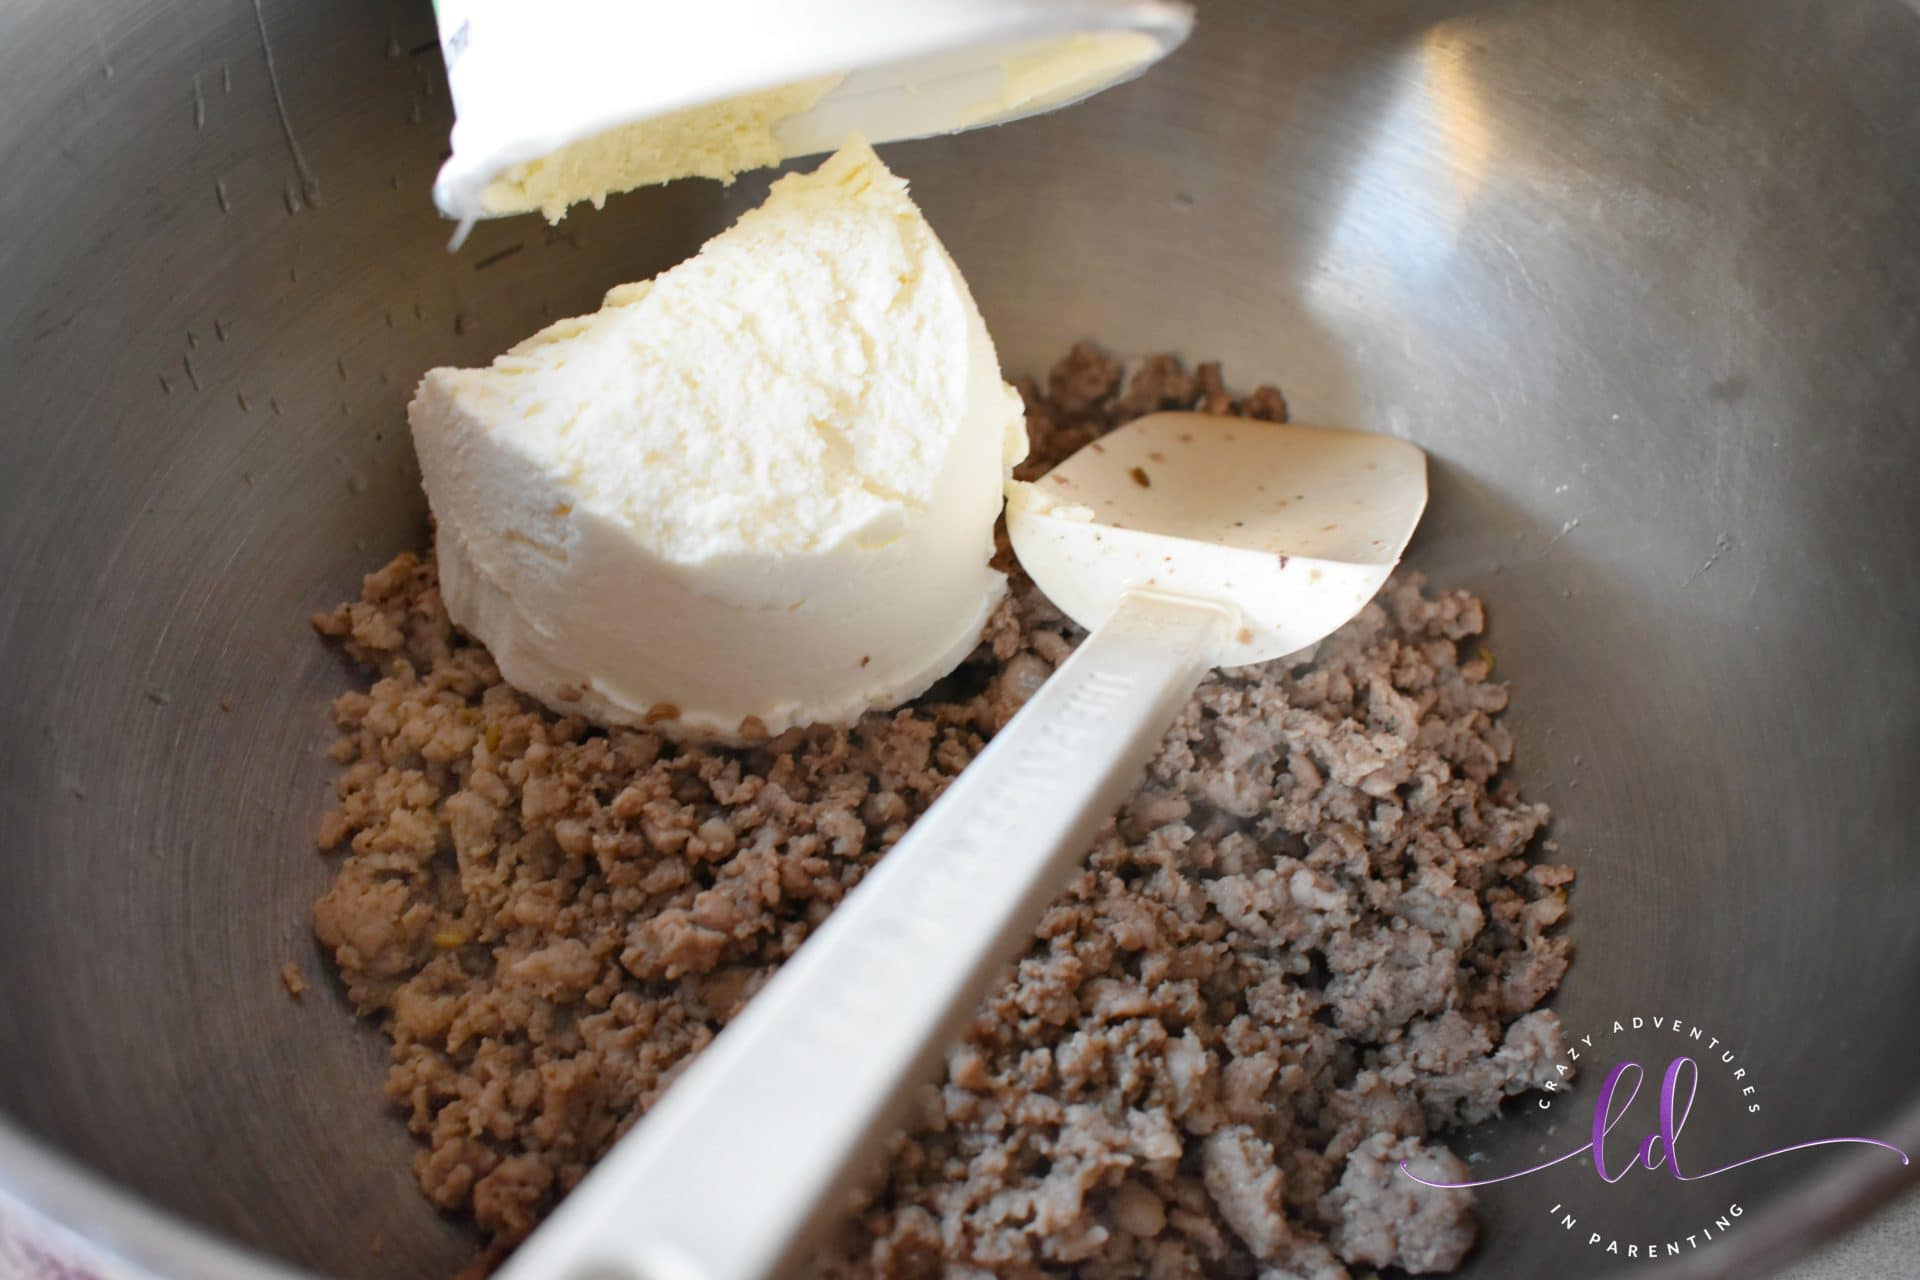 Add ricotta to meat for homemade lasagna